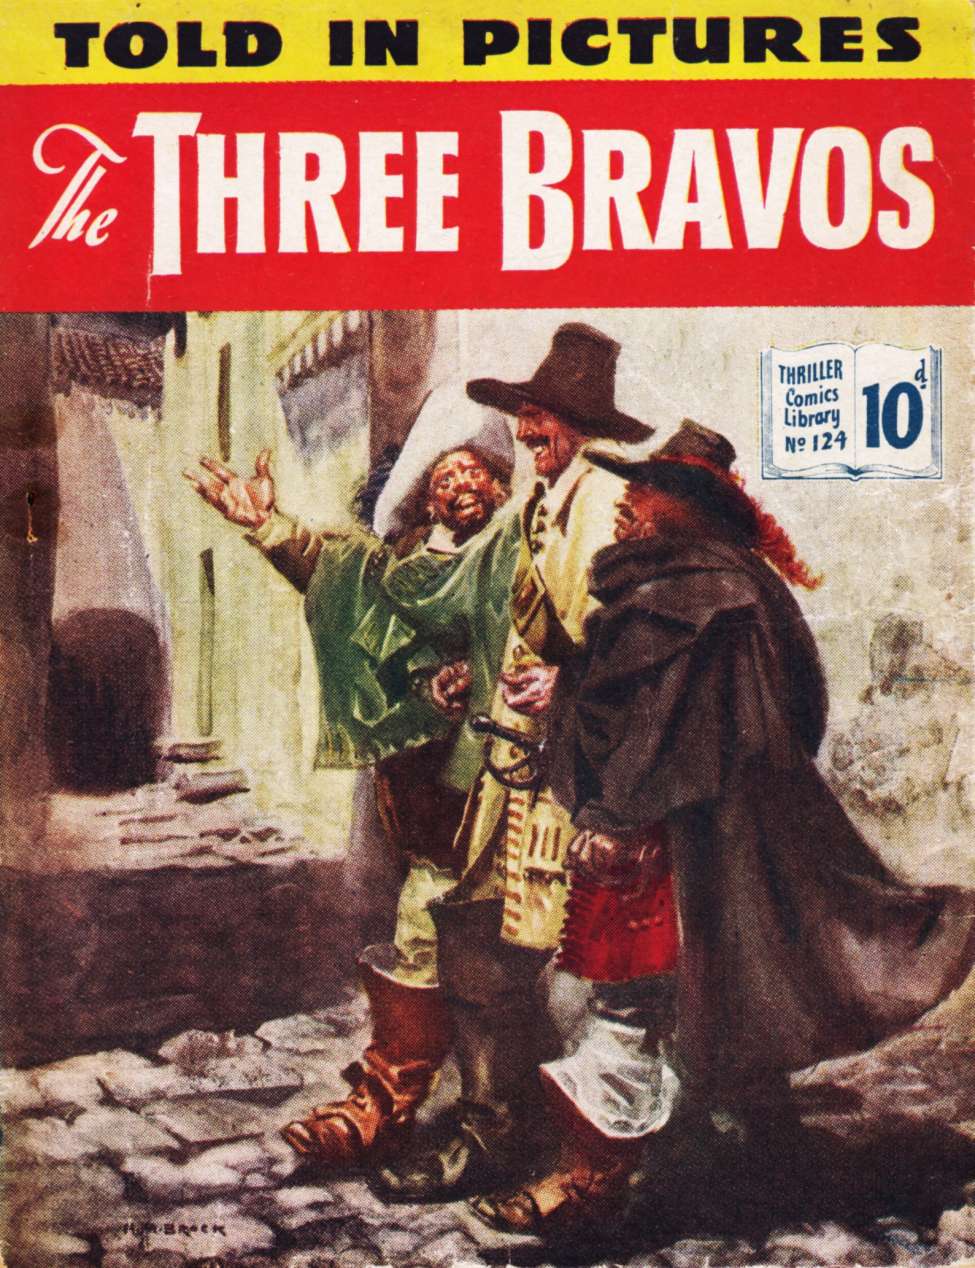 Book Cover For Thriller Comics Library 124 - The Three Bravos